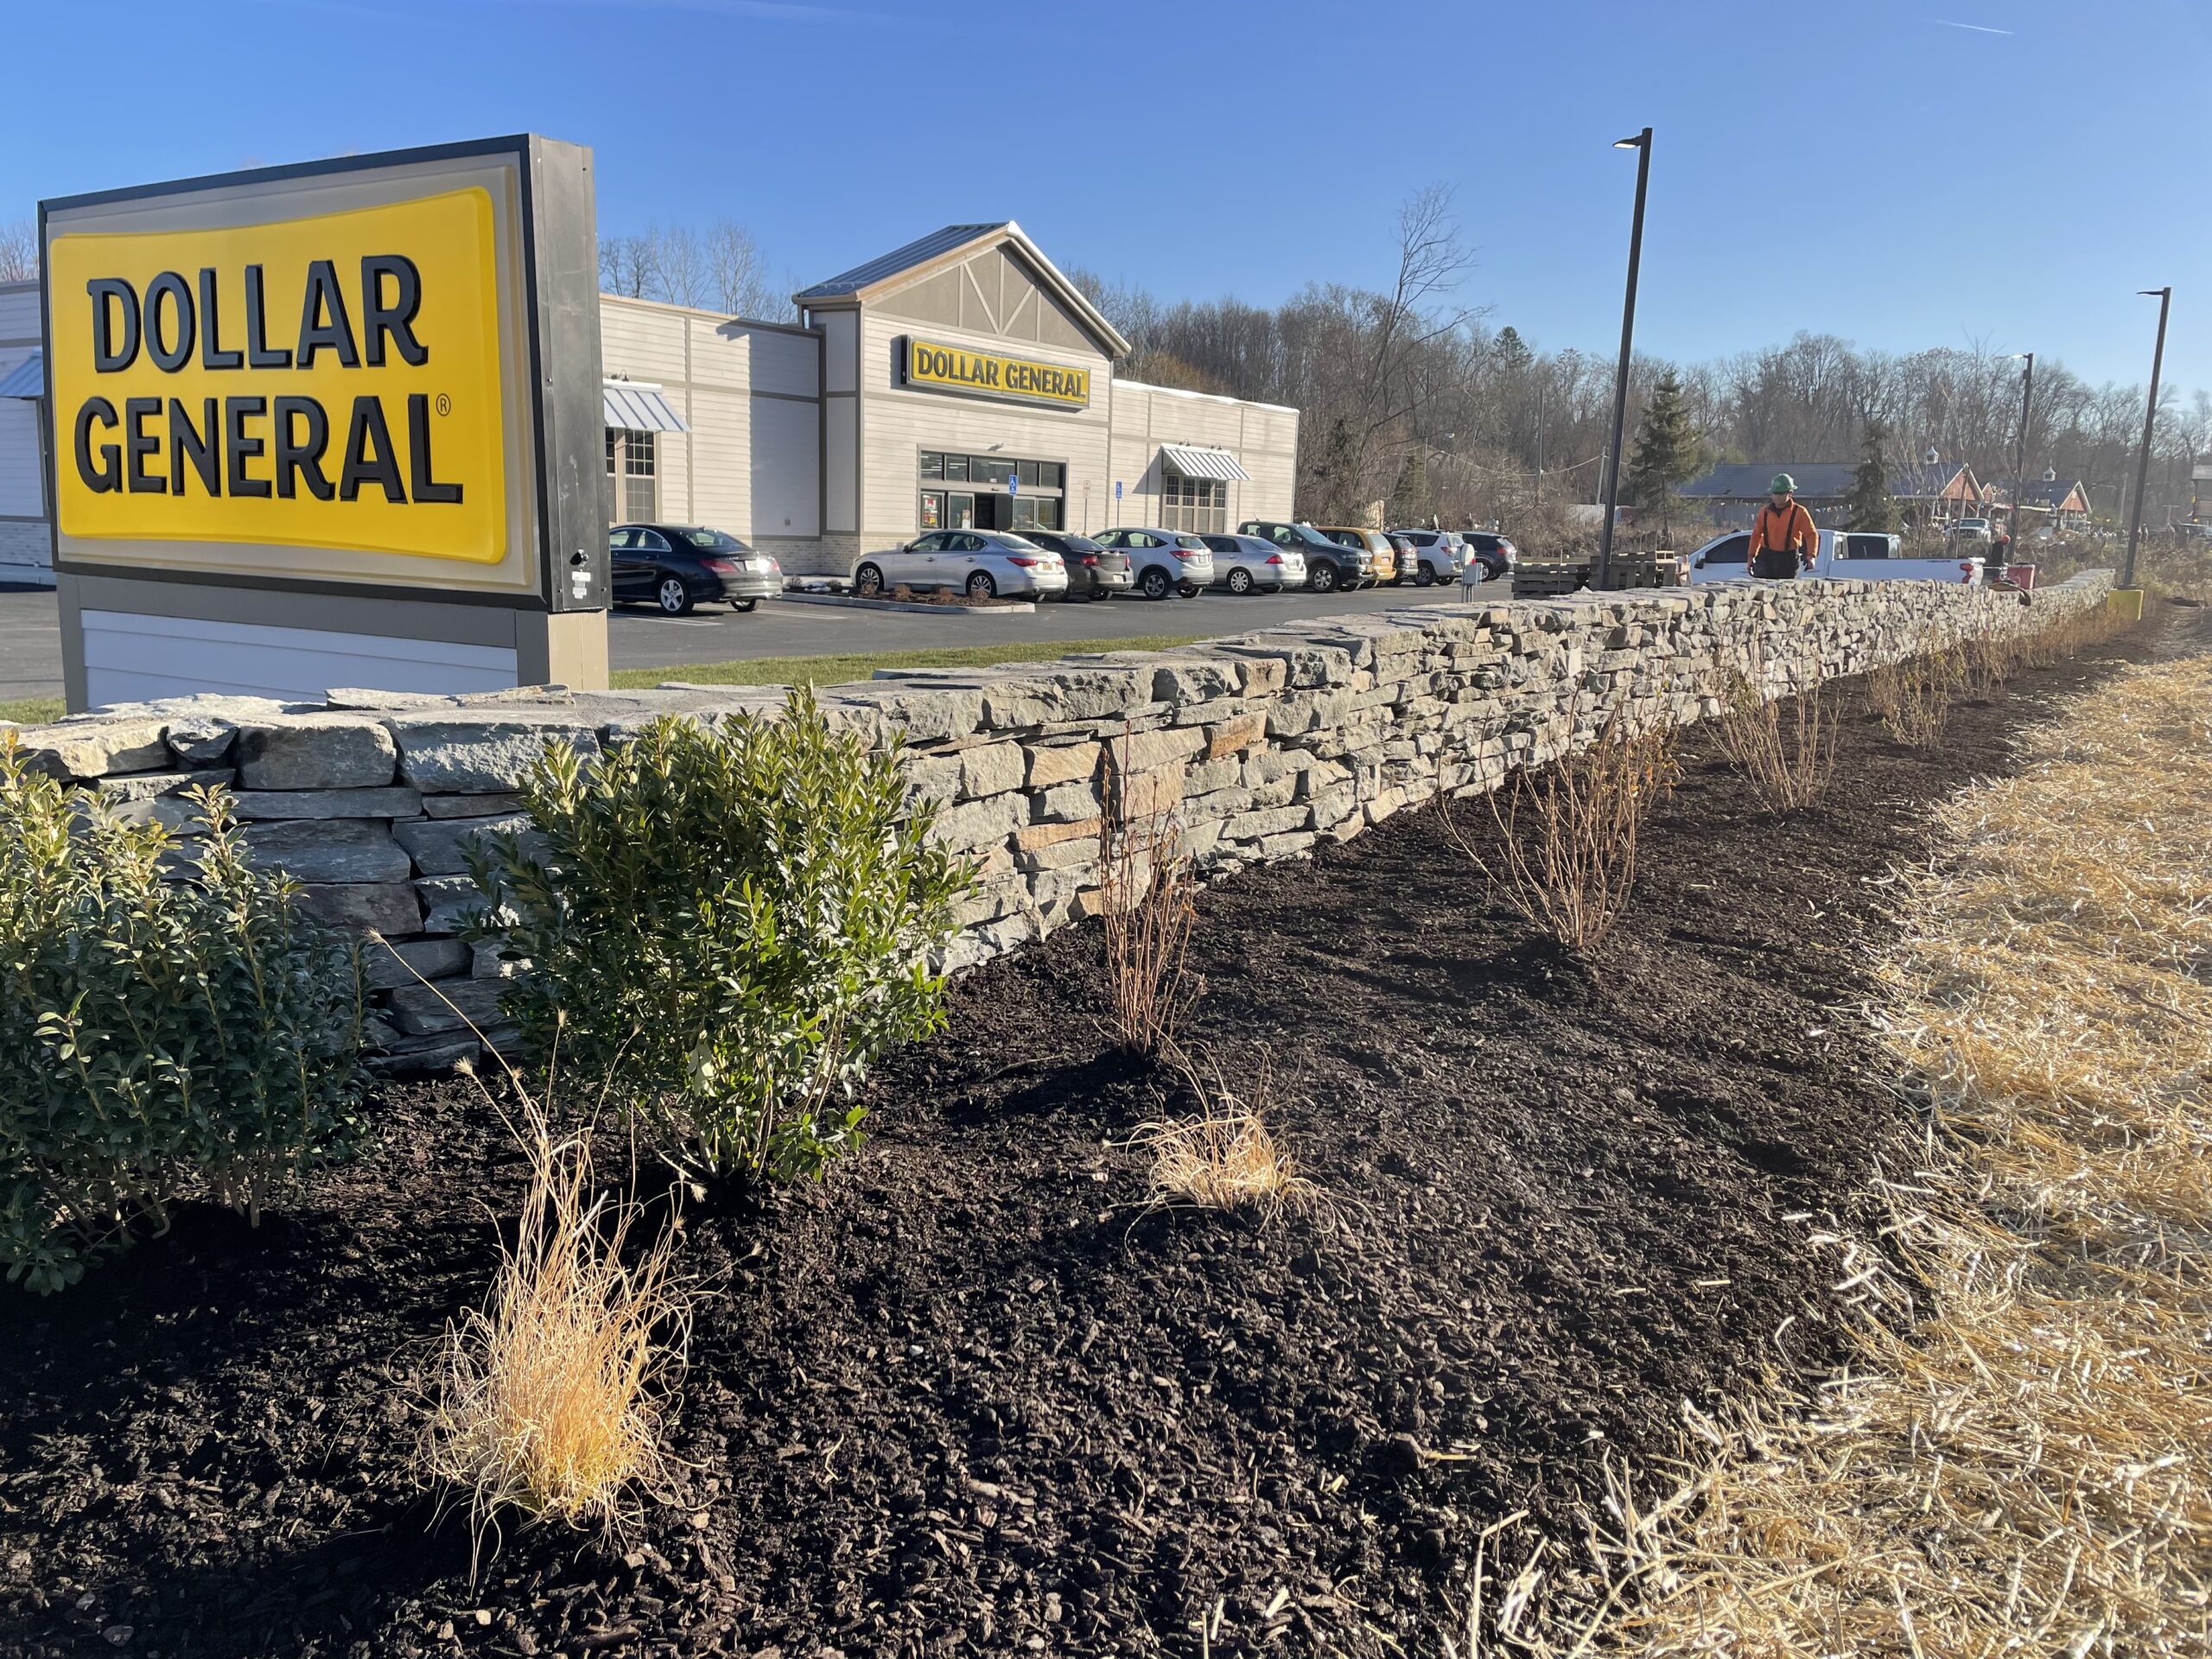 Stone and Retaining Walls outside Dollar General